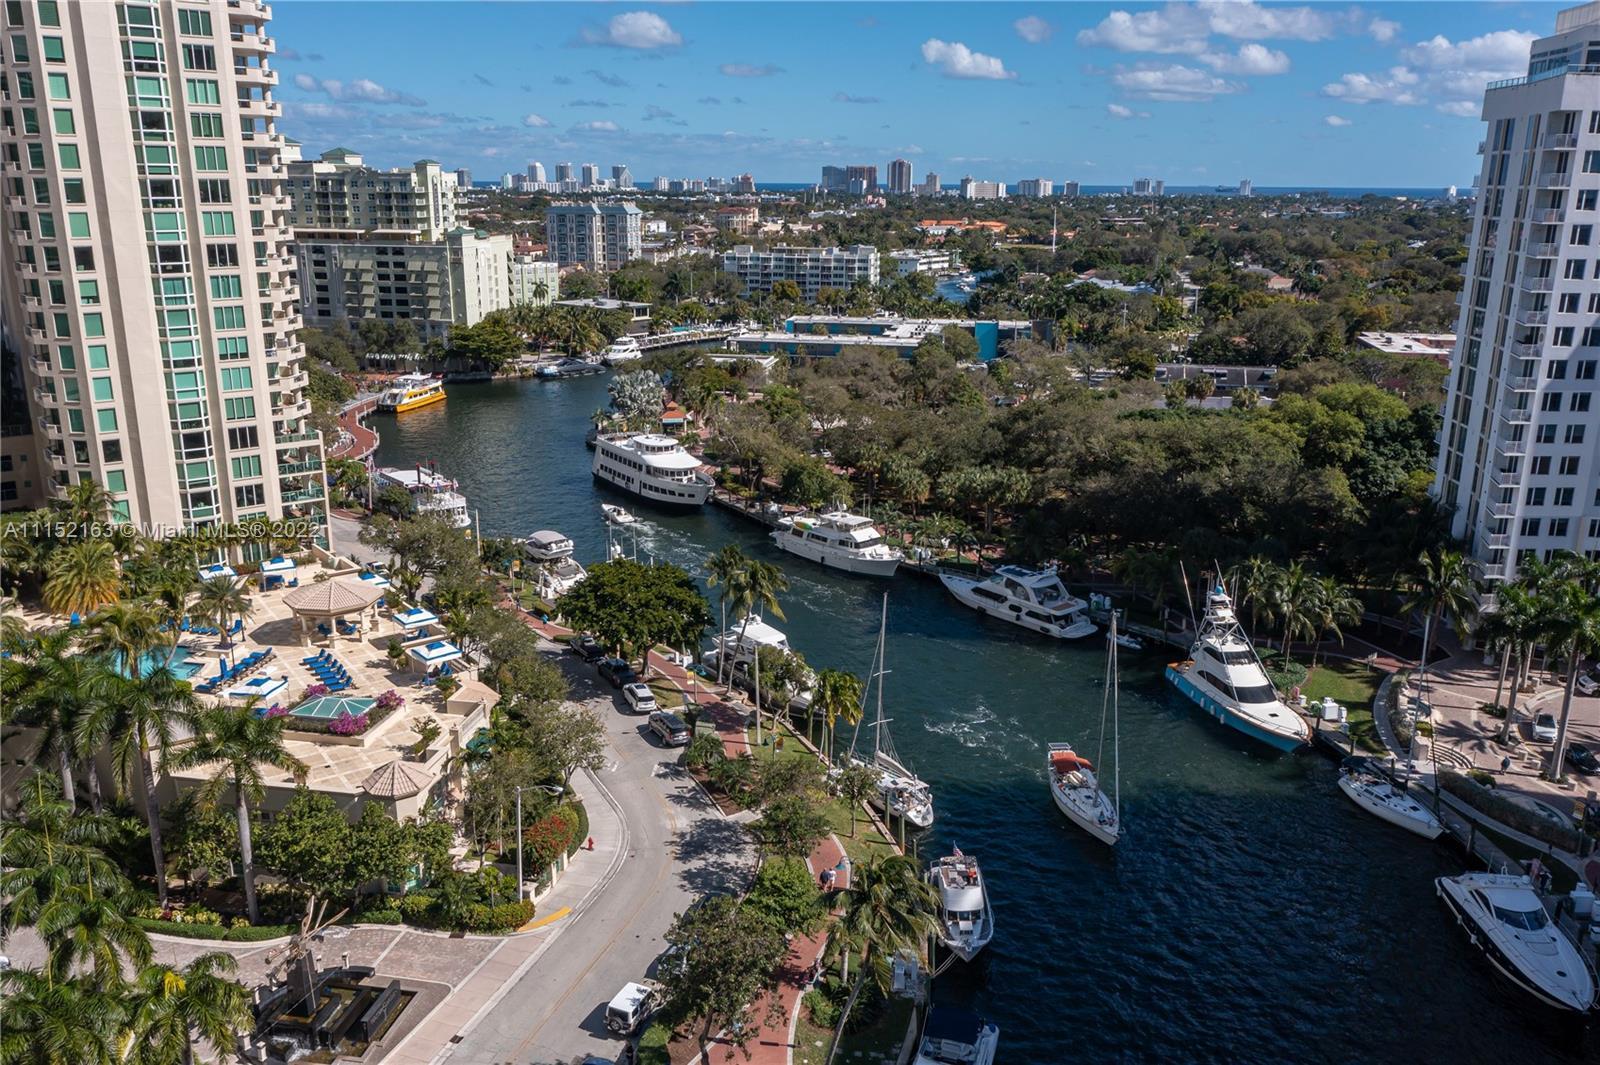 Live in the Heart of Ft Lauderdale in this Riverfront exclusive Las Olas Grand Condo Residence offer